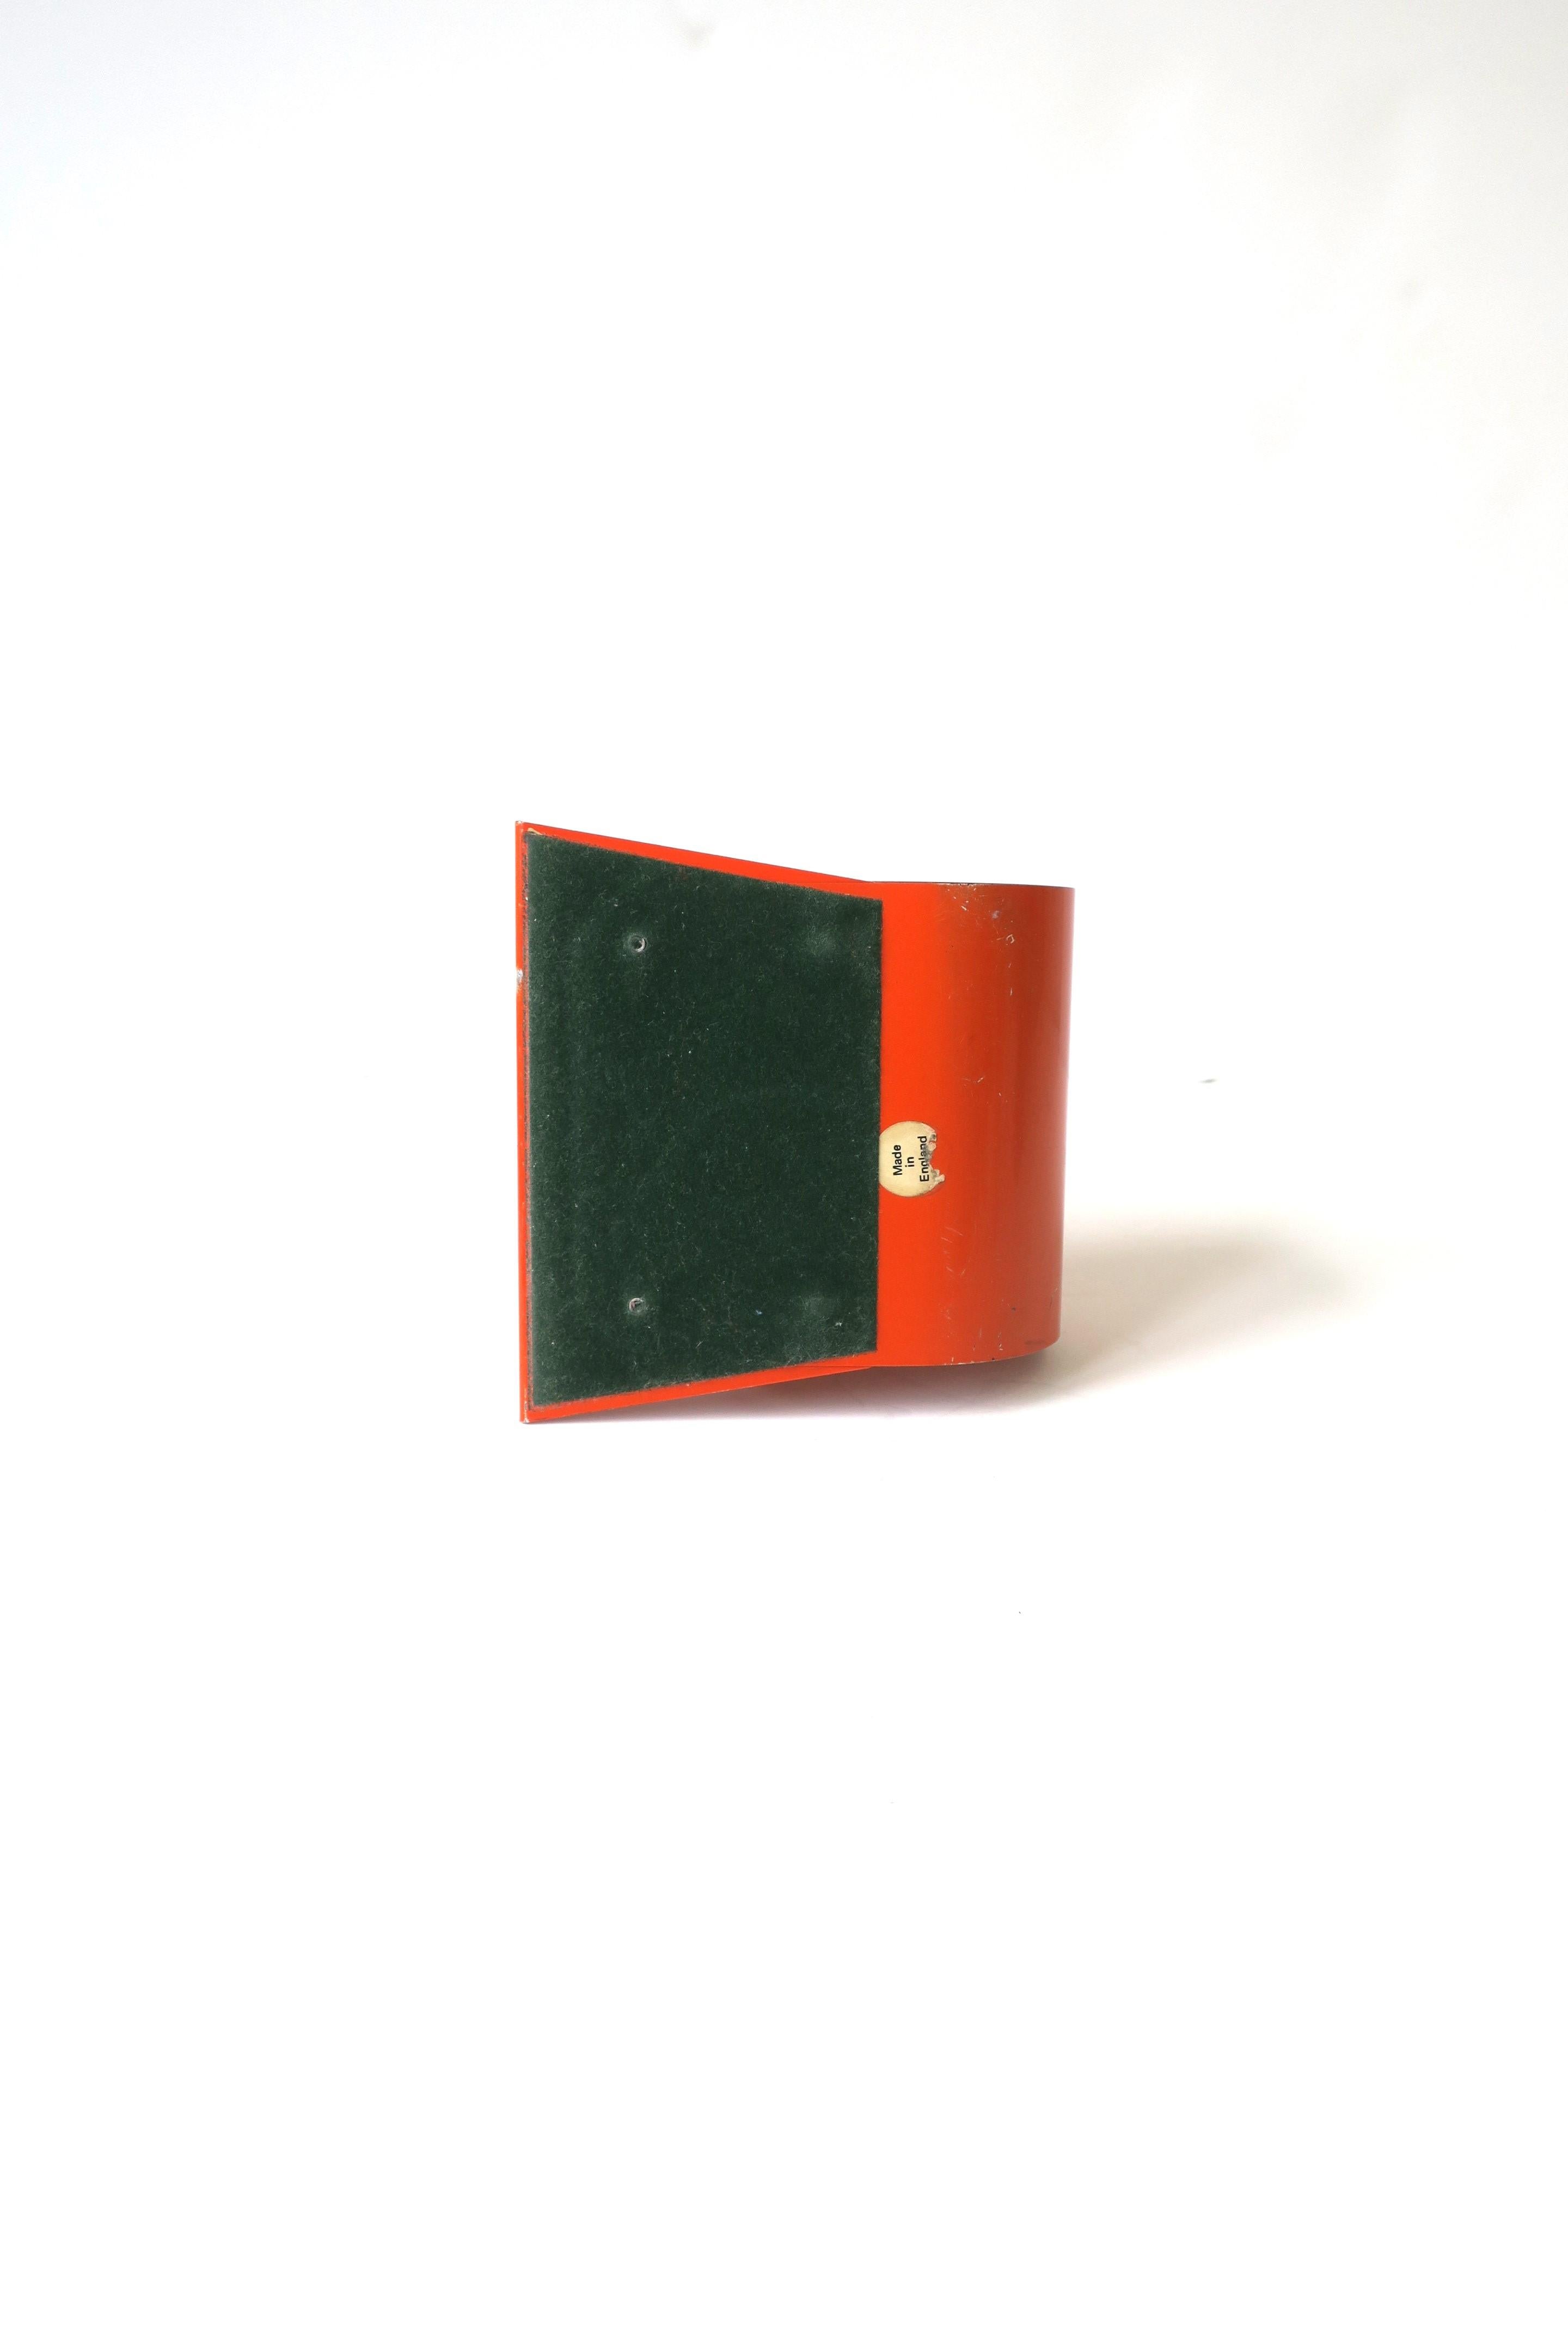 Midcentury Modern Expandable Orange Metal Bookend Holder, Made in England For Sale 5